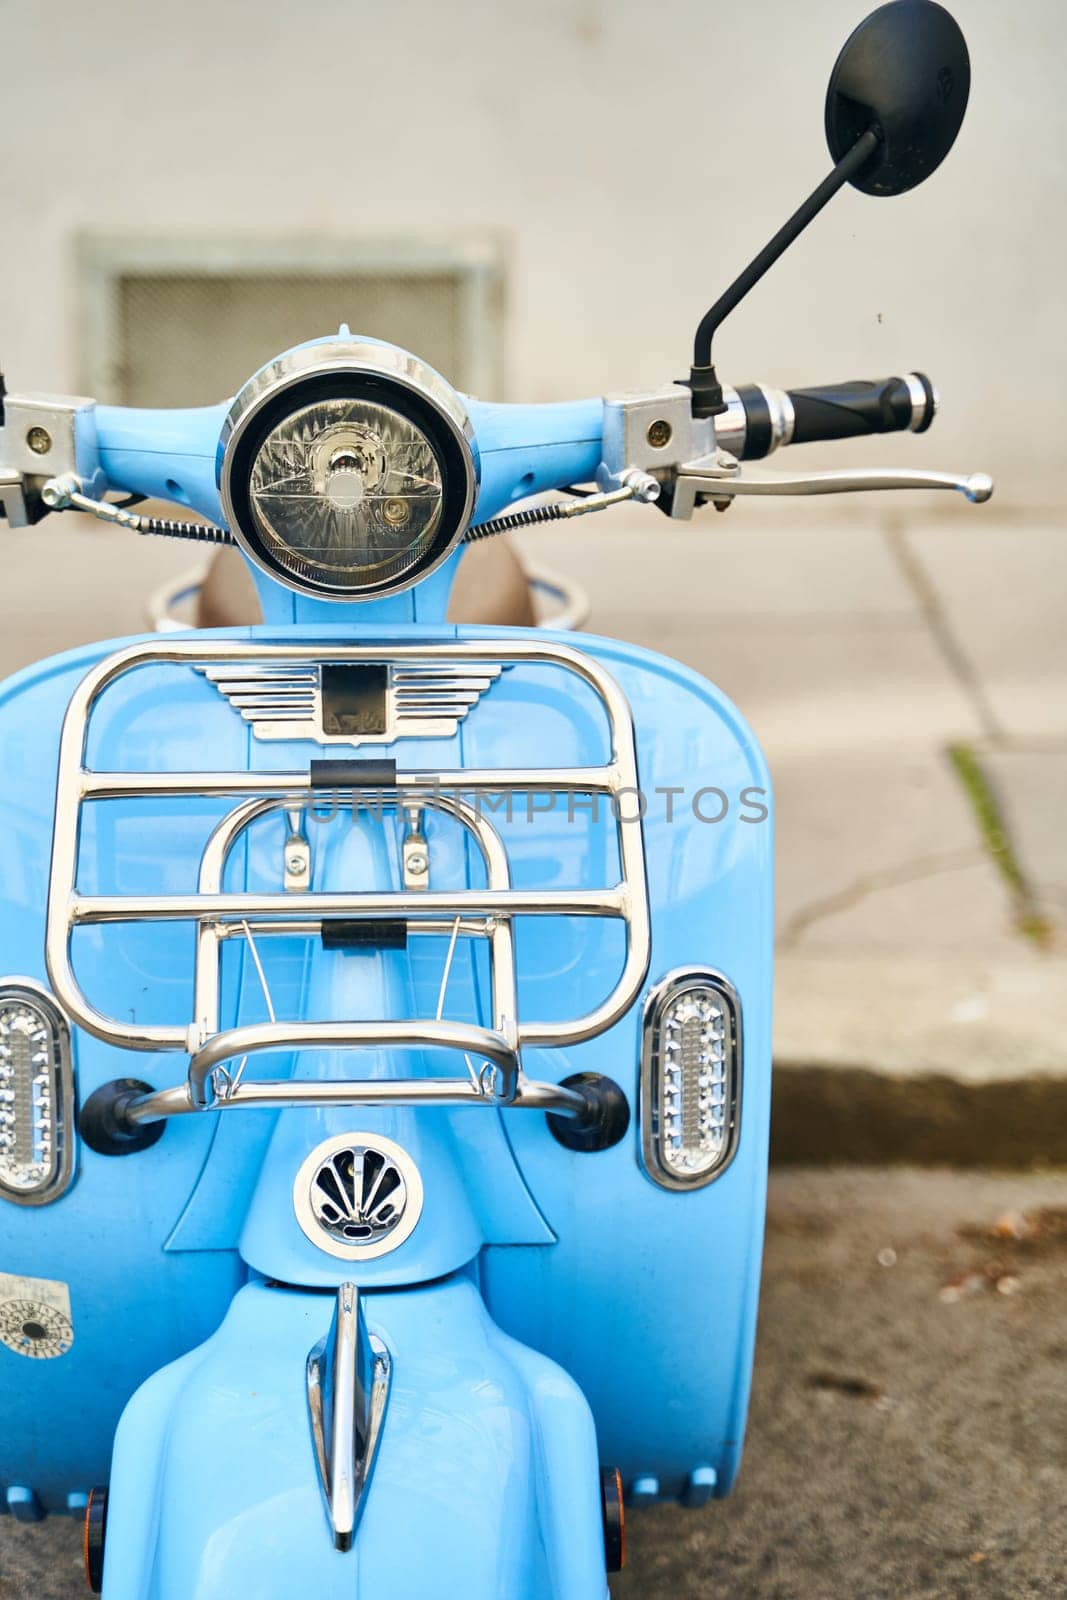 A blue motorcycle is parked on the side of the road, showcasing its automotive design with a sleek fender and rim. Mode of transport with automotive lighting and tire